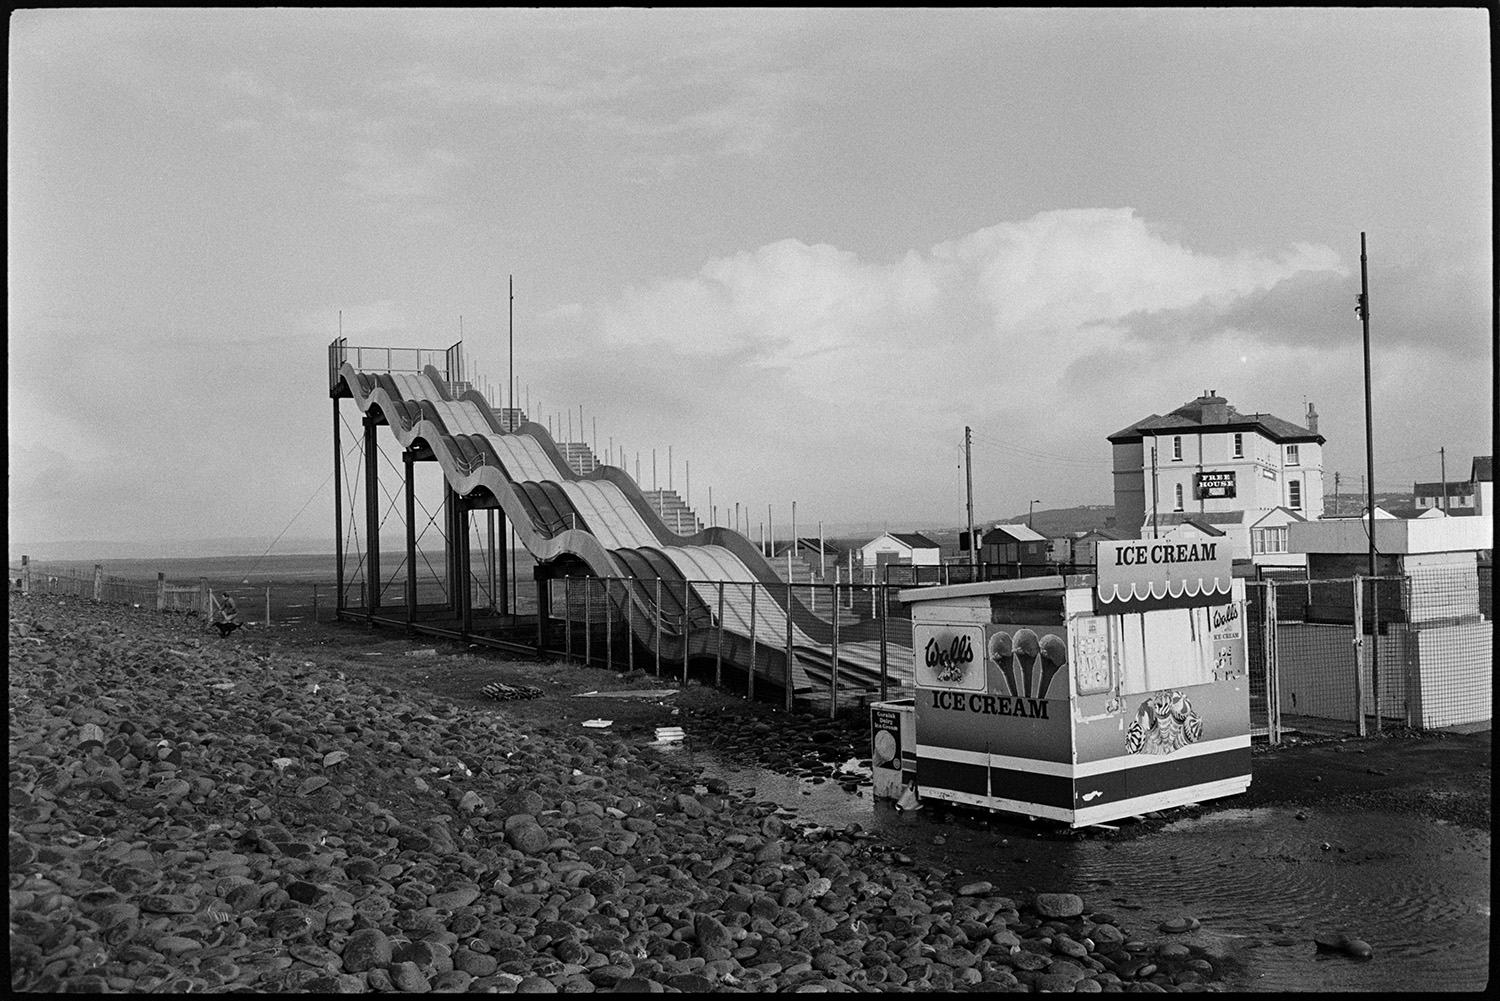 Giant slide at seaside. Out of season.
[The 'Astroglide' giant slide and ice cream kiosk behind the pebble ridge at Westward Ho!.]